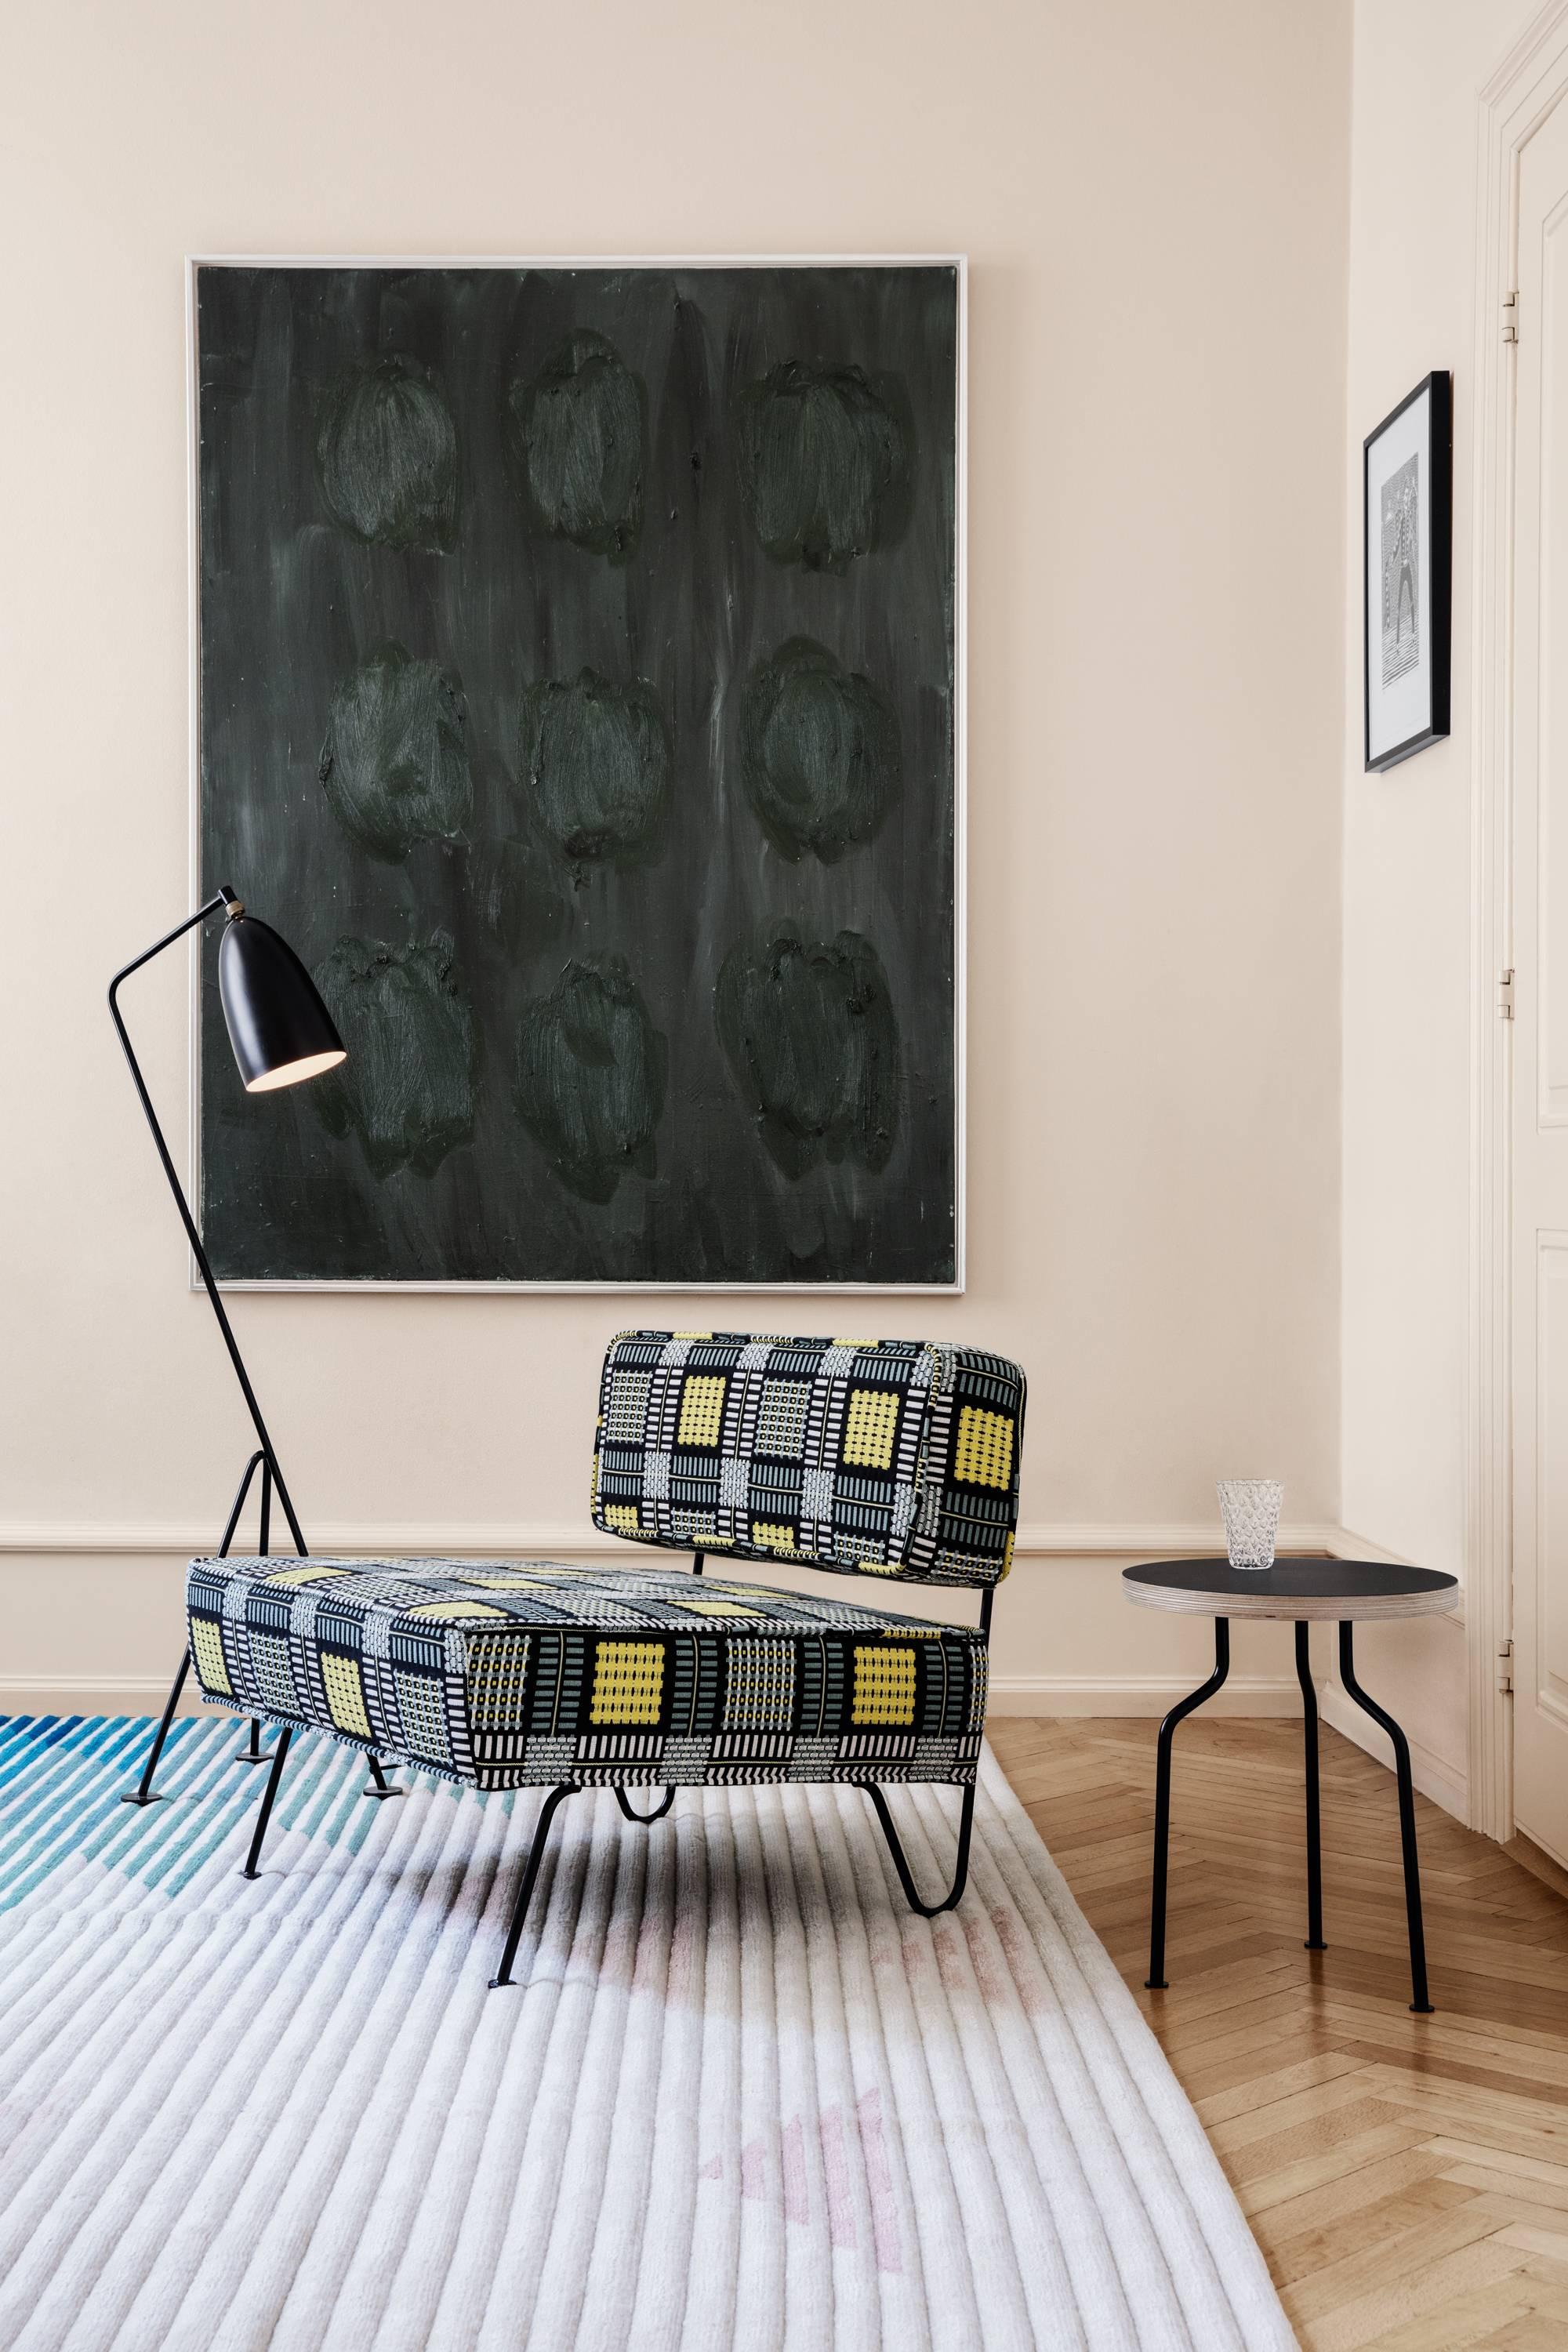 Greta Magnusson Grossman 'Grasshopper' floor lamp in black. Designed in 1947 by Grossman, this is an authorized re-edition by GUBI of Denmark who meticulously reproduces her work with scrupulous attention to detail and materials that are faithful to